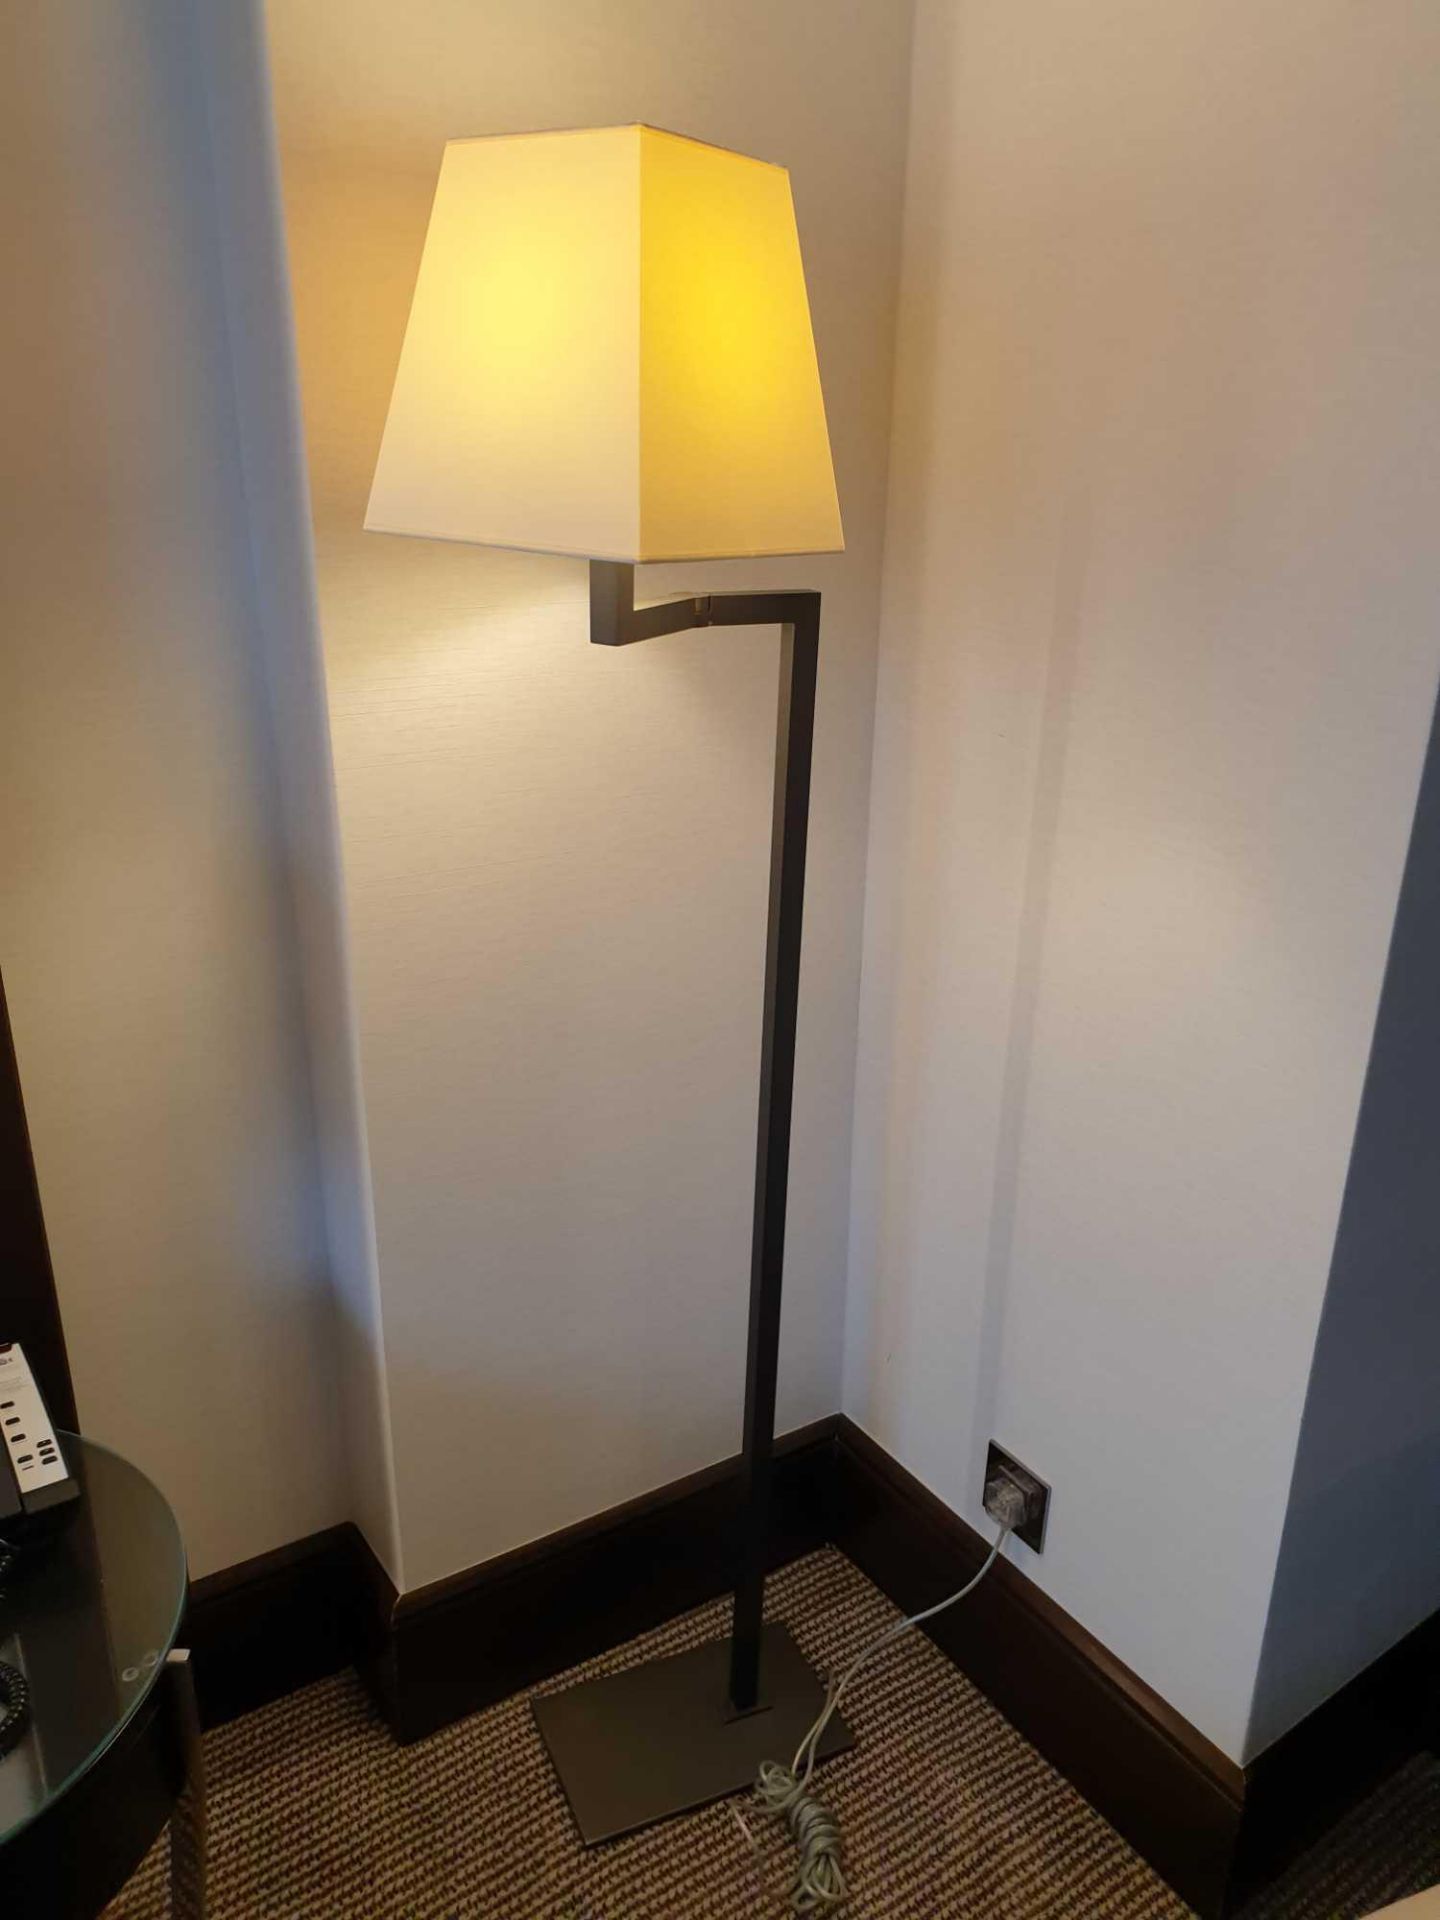 Sifra Floor Lamp Model LMS 600 ENG Grey Metal Base With Single Arm Single Bulb Complete With Cream - Image 3 of 3